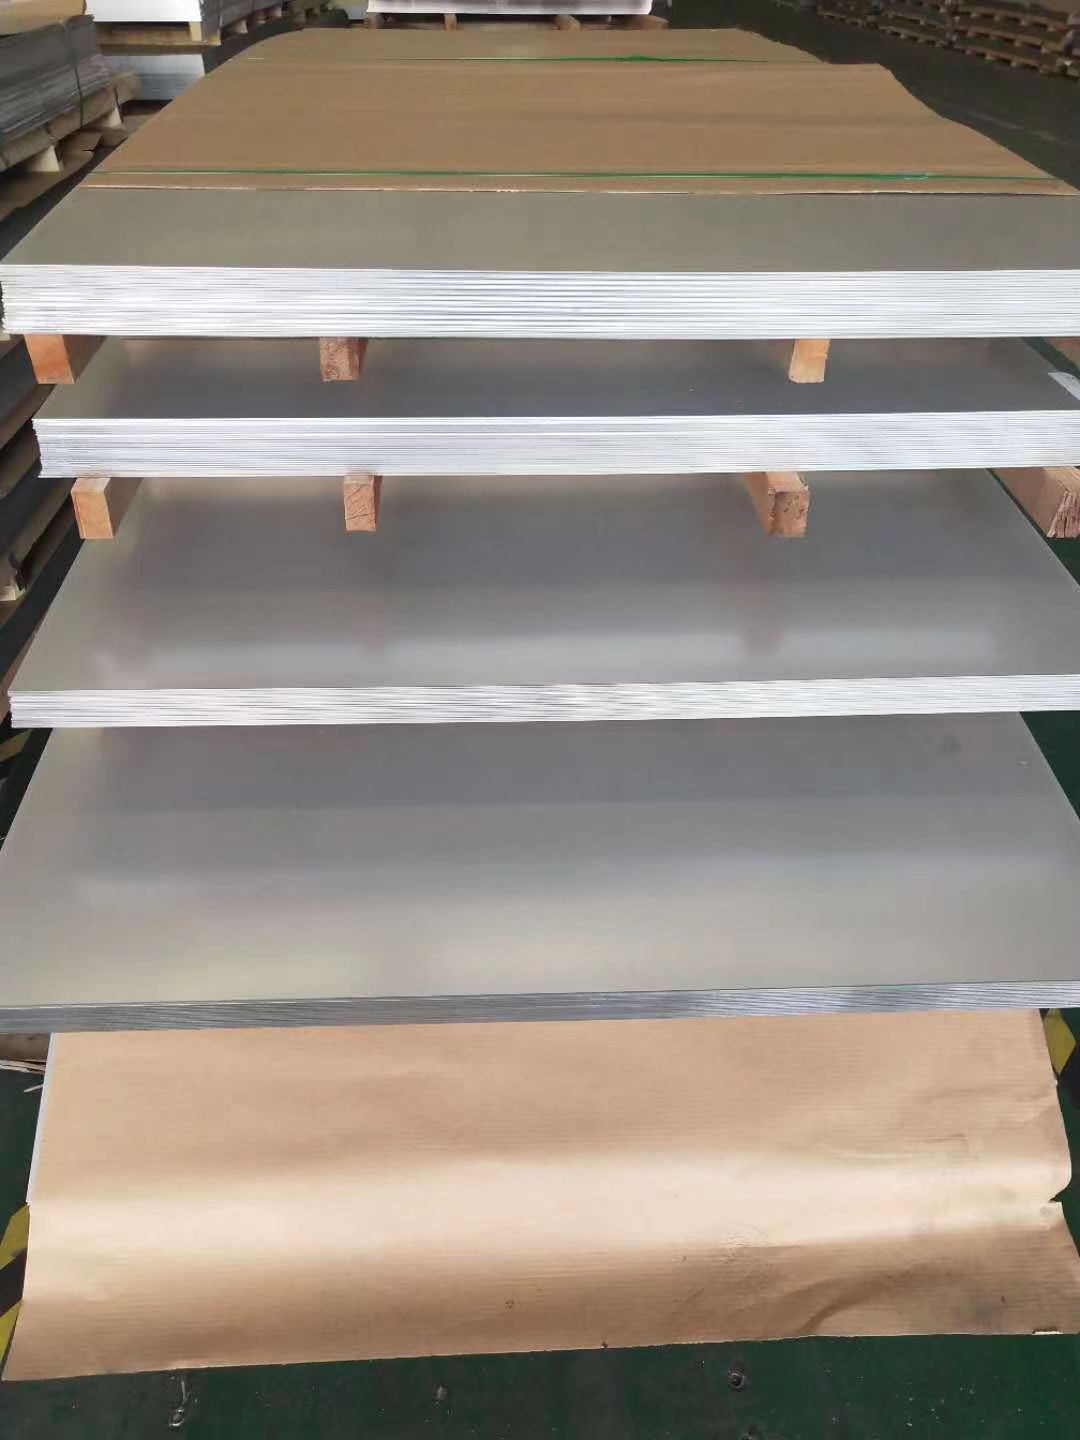 stainless steel plate Cold rolled stainless steel sheet 304 stainless steel plat Stainless steel plate manufacturer